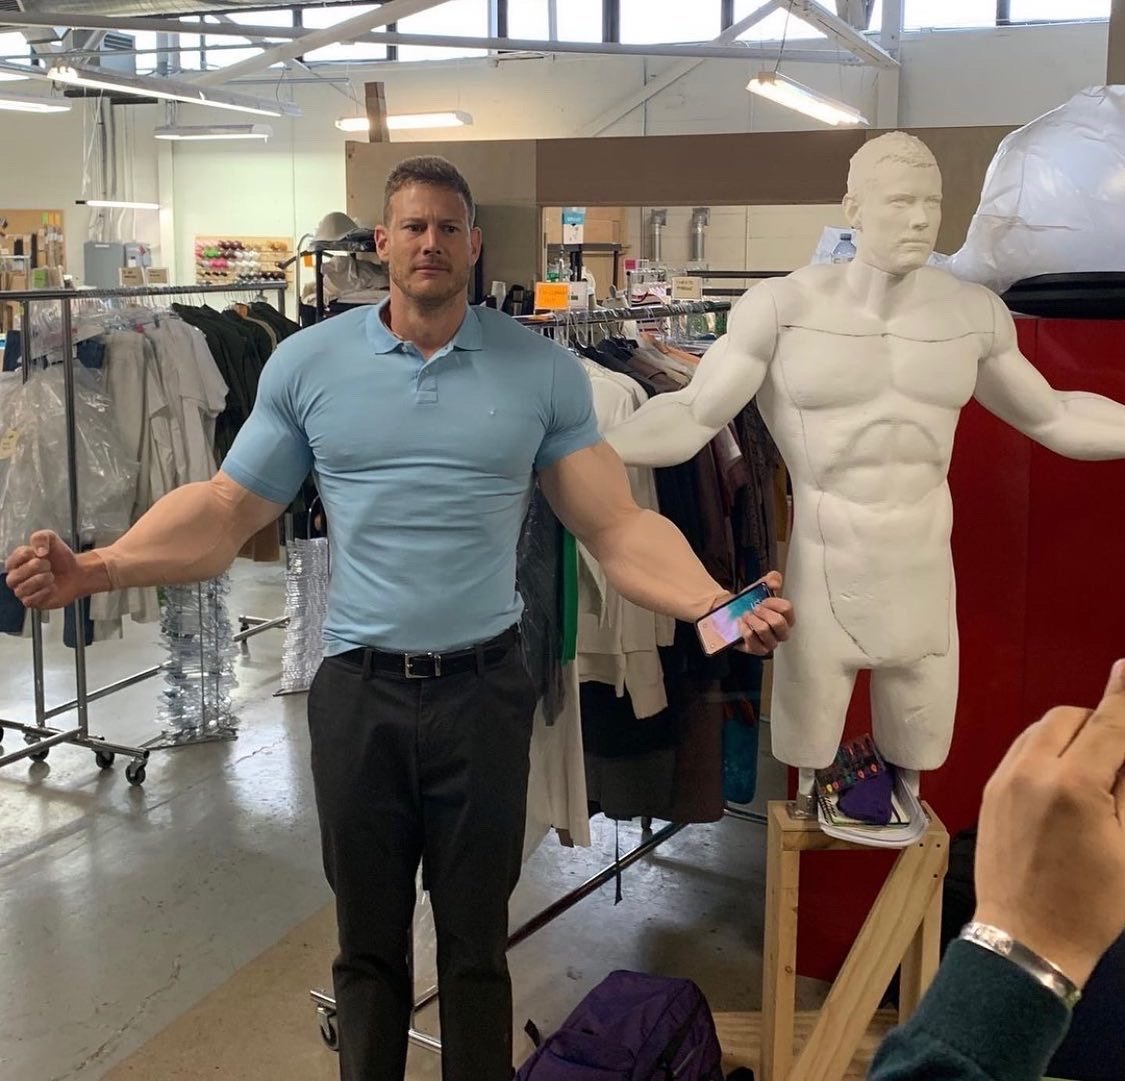 Muscle Suit for Tom Hopper "Luther" of Umbrella Academy